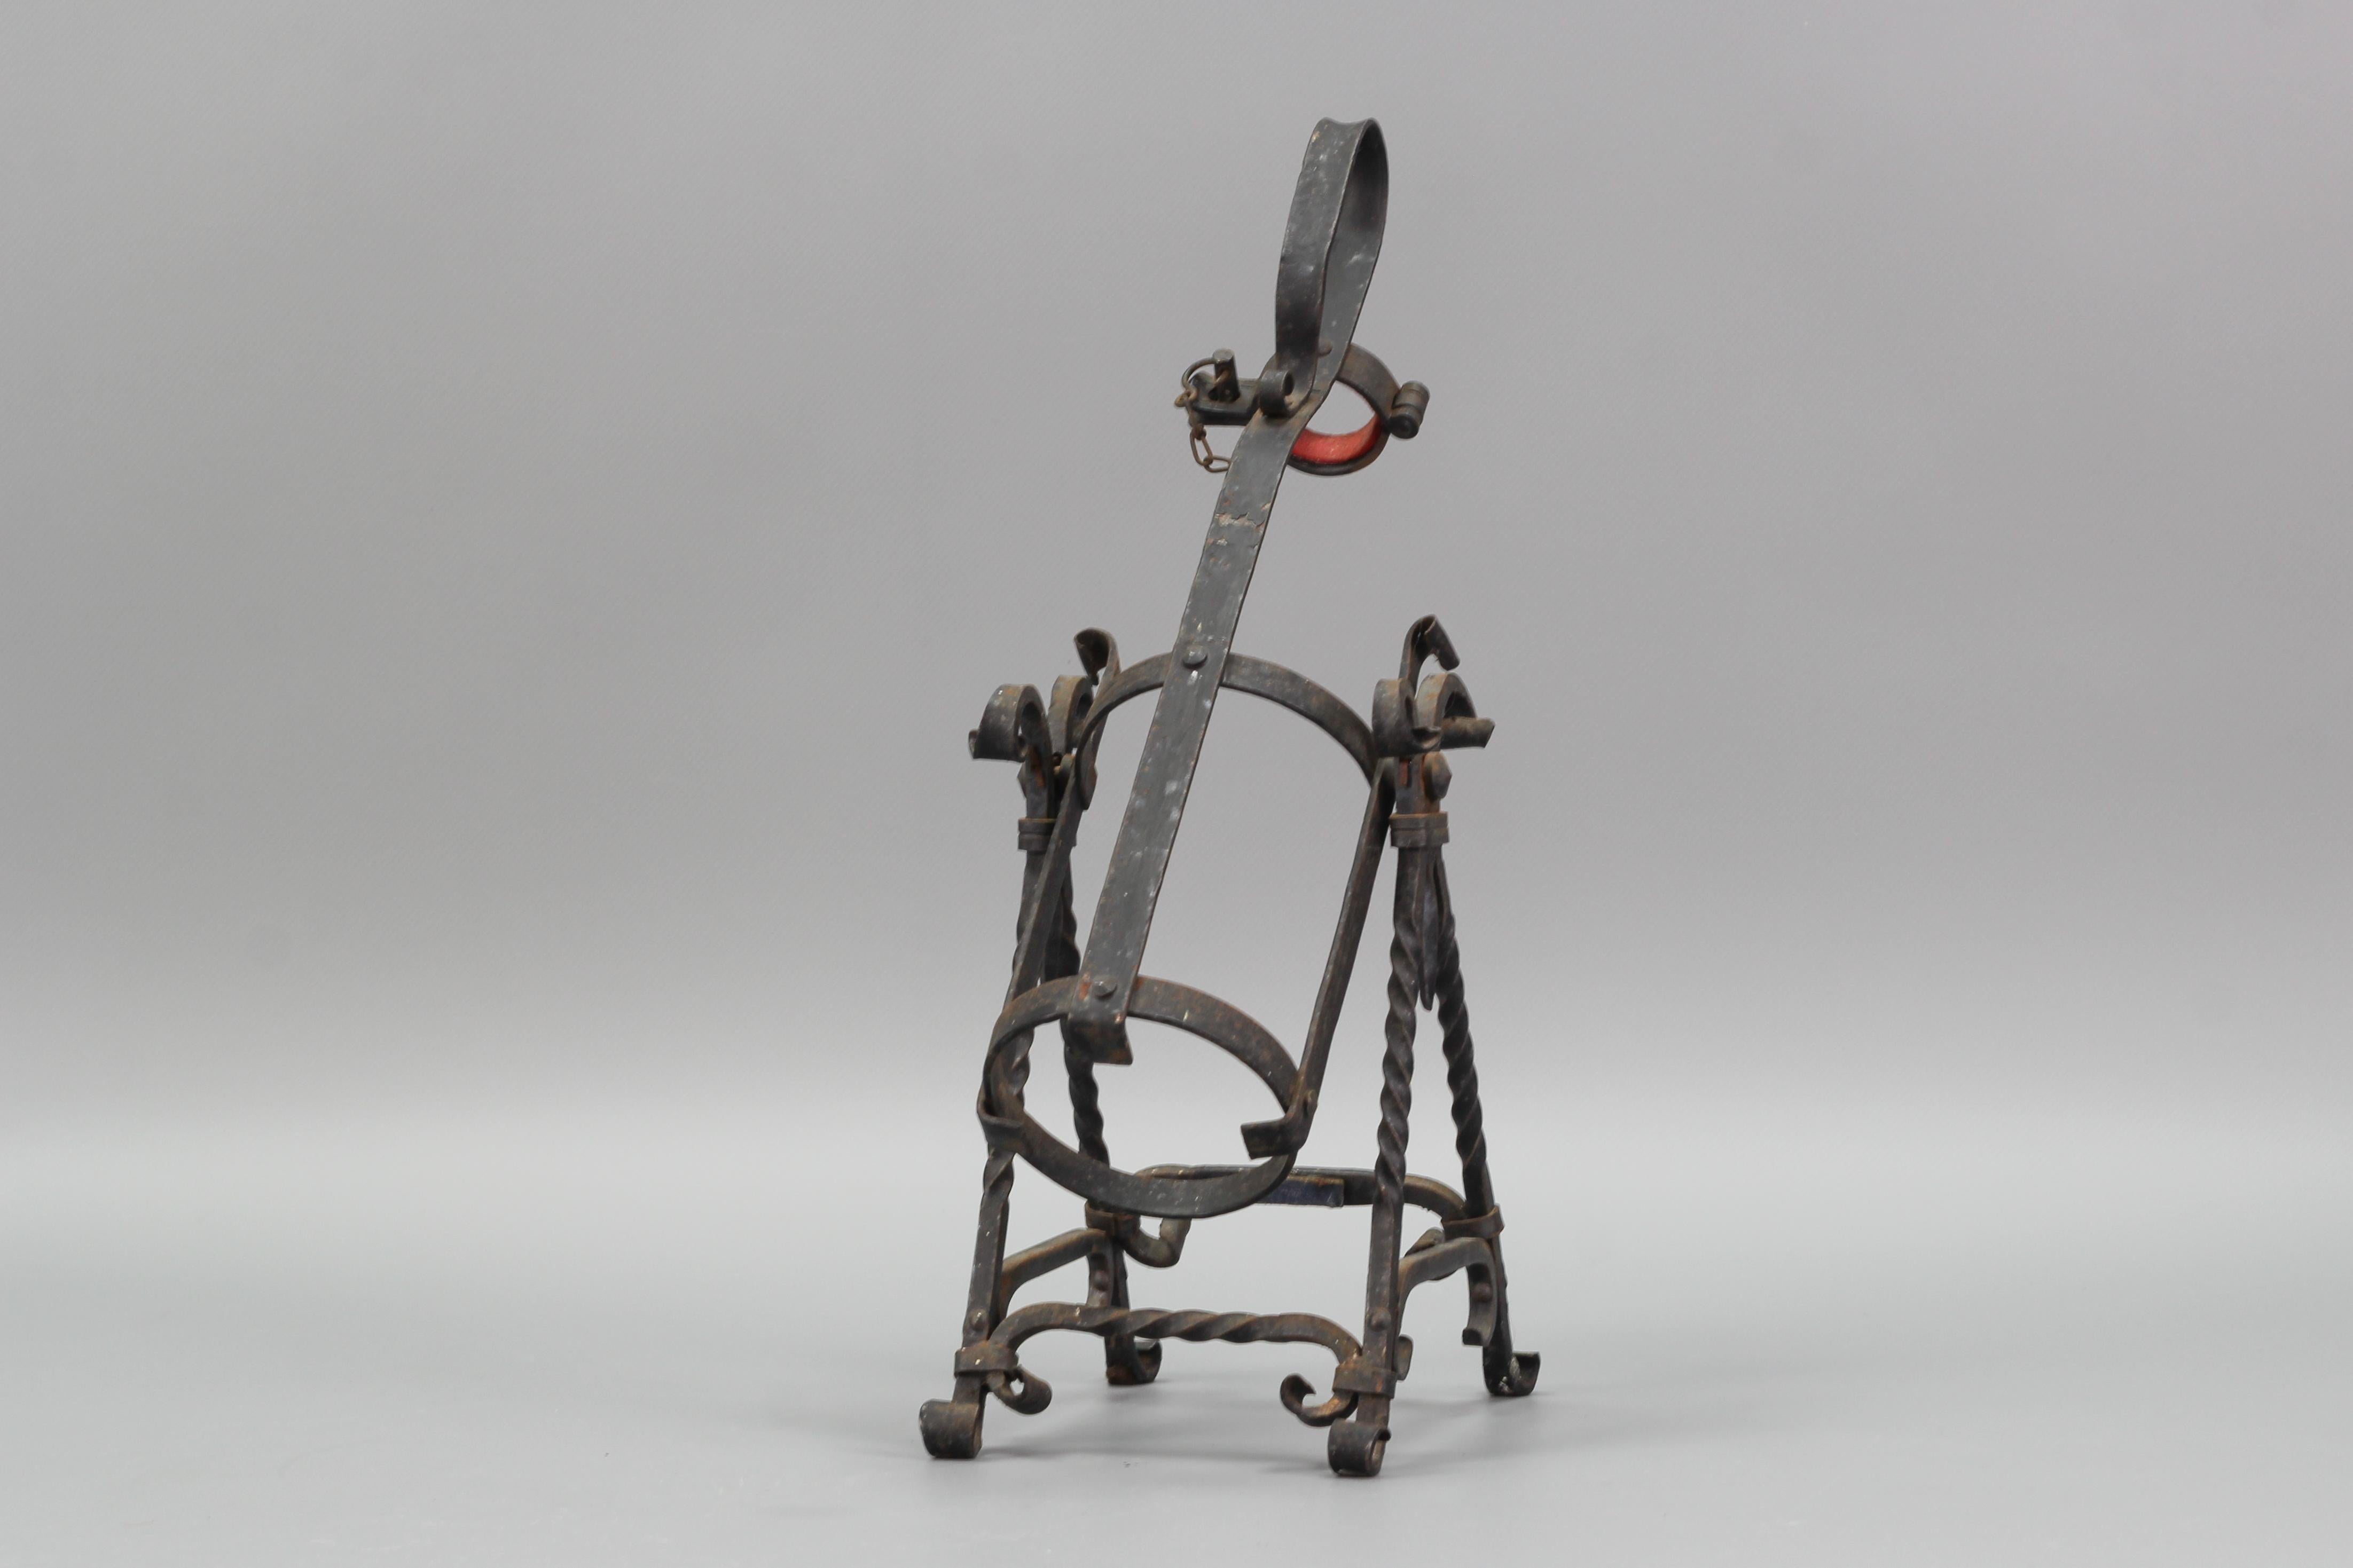 This beautiful bottle holder/bottle pourer in Medieval style was made in Germany circa the 1970s by the company Asbach. The wrought iron stand holds a bottle and can be also used for the purpose of pouring brandy or other beverages to ensure a